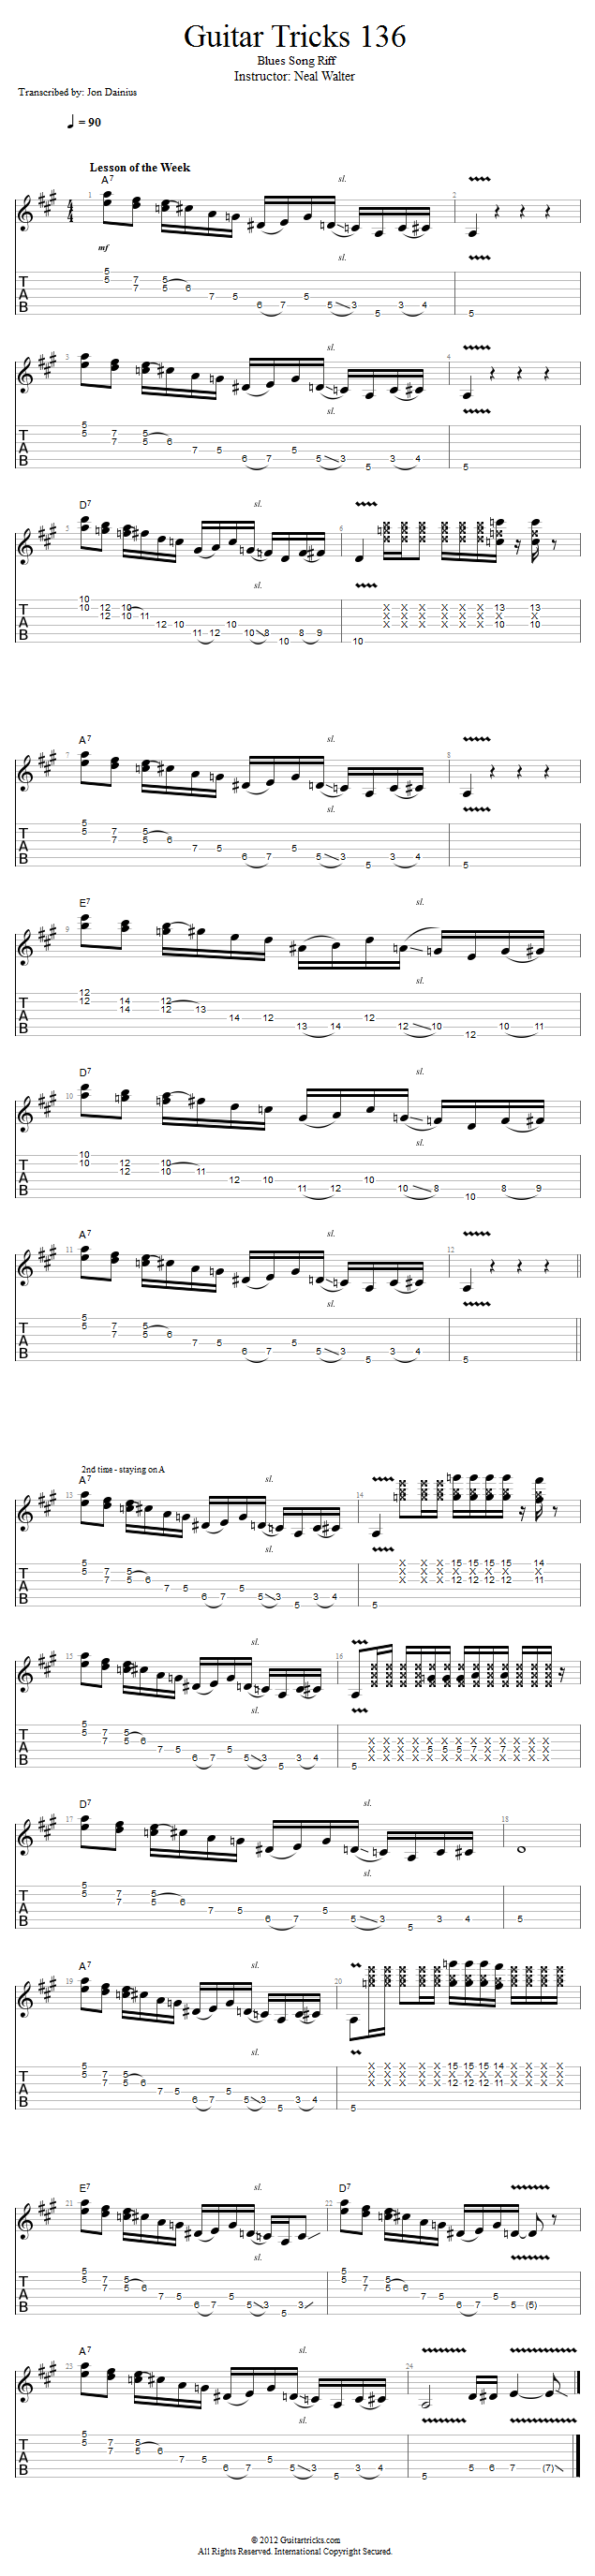 Guitar Tricks 139: Blues Song Riff song notation